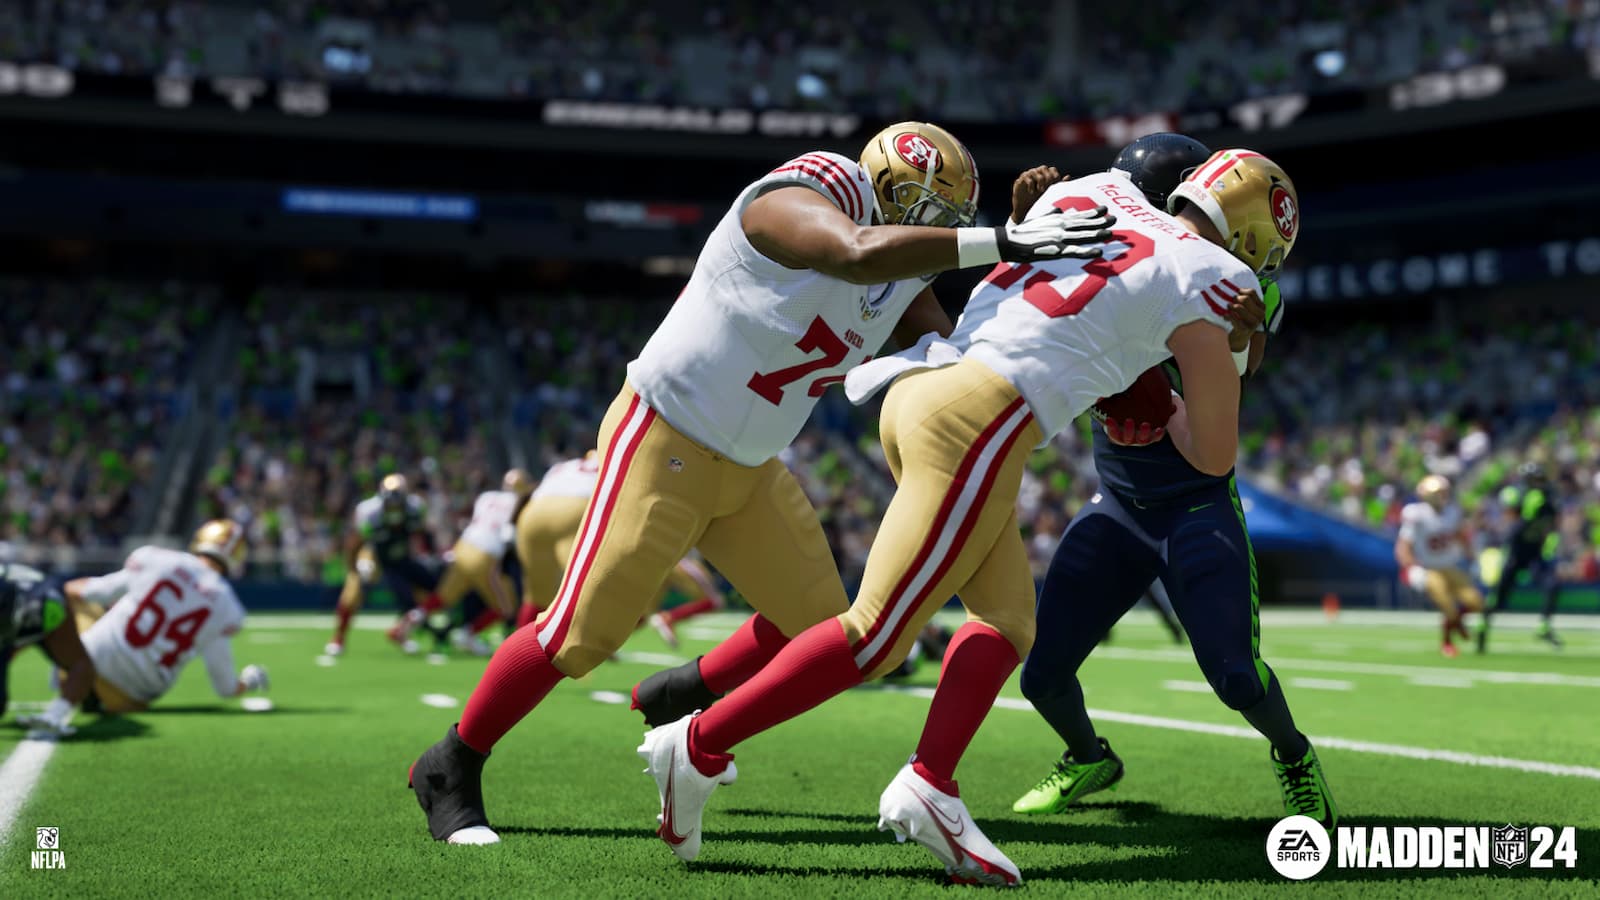 49ers and Seahawks players in Madden 24